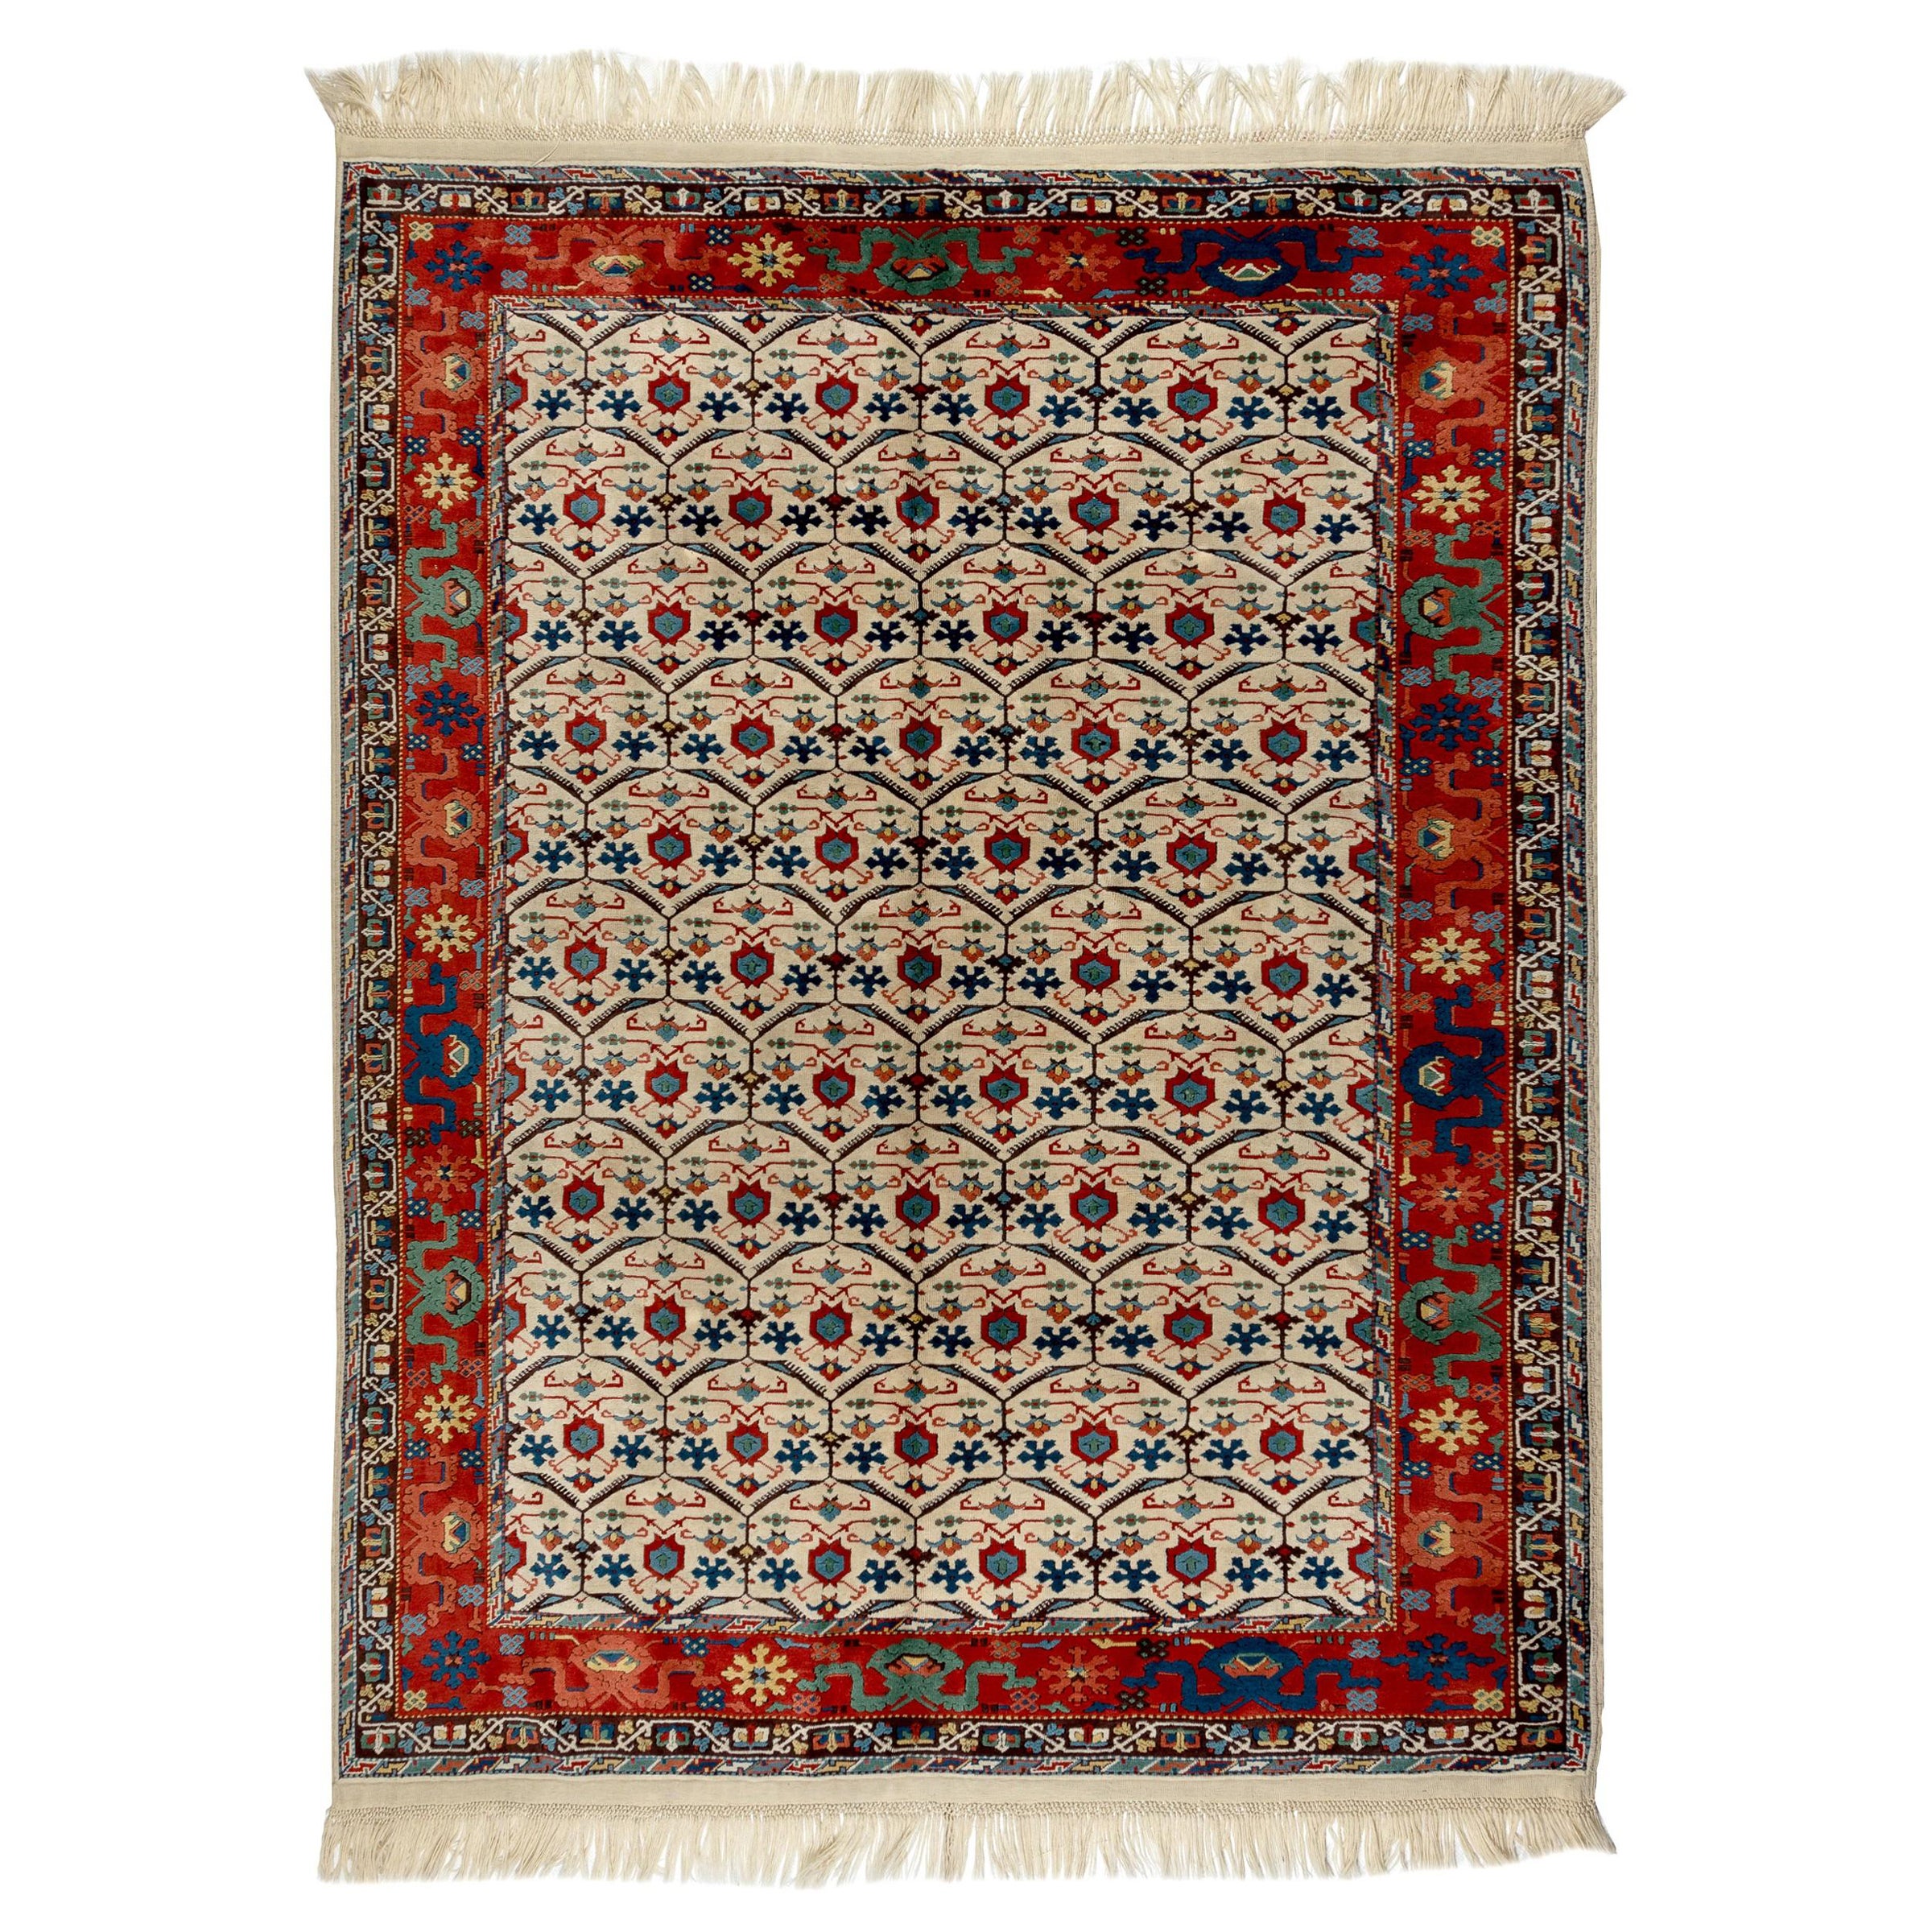 7' x 9'  Gorgeous Fine Brand New Turkish Rug, 100% Natural Dyed Wool